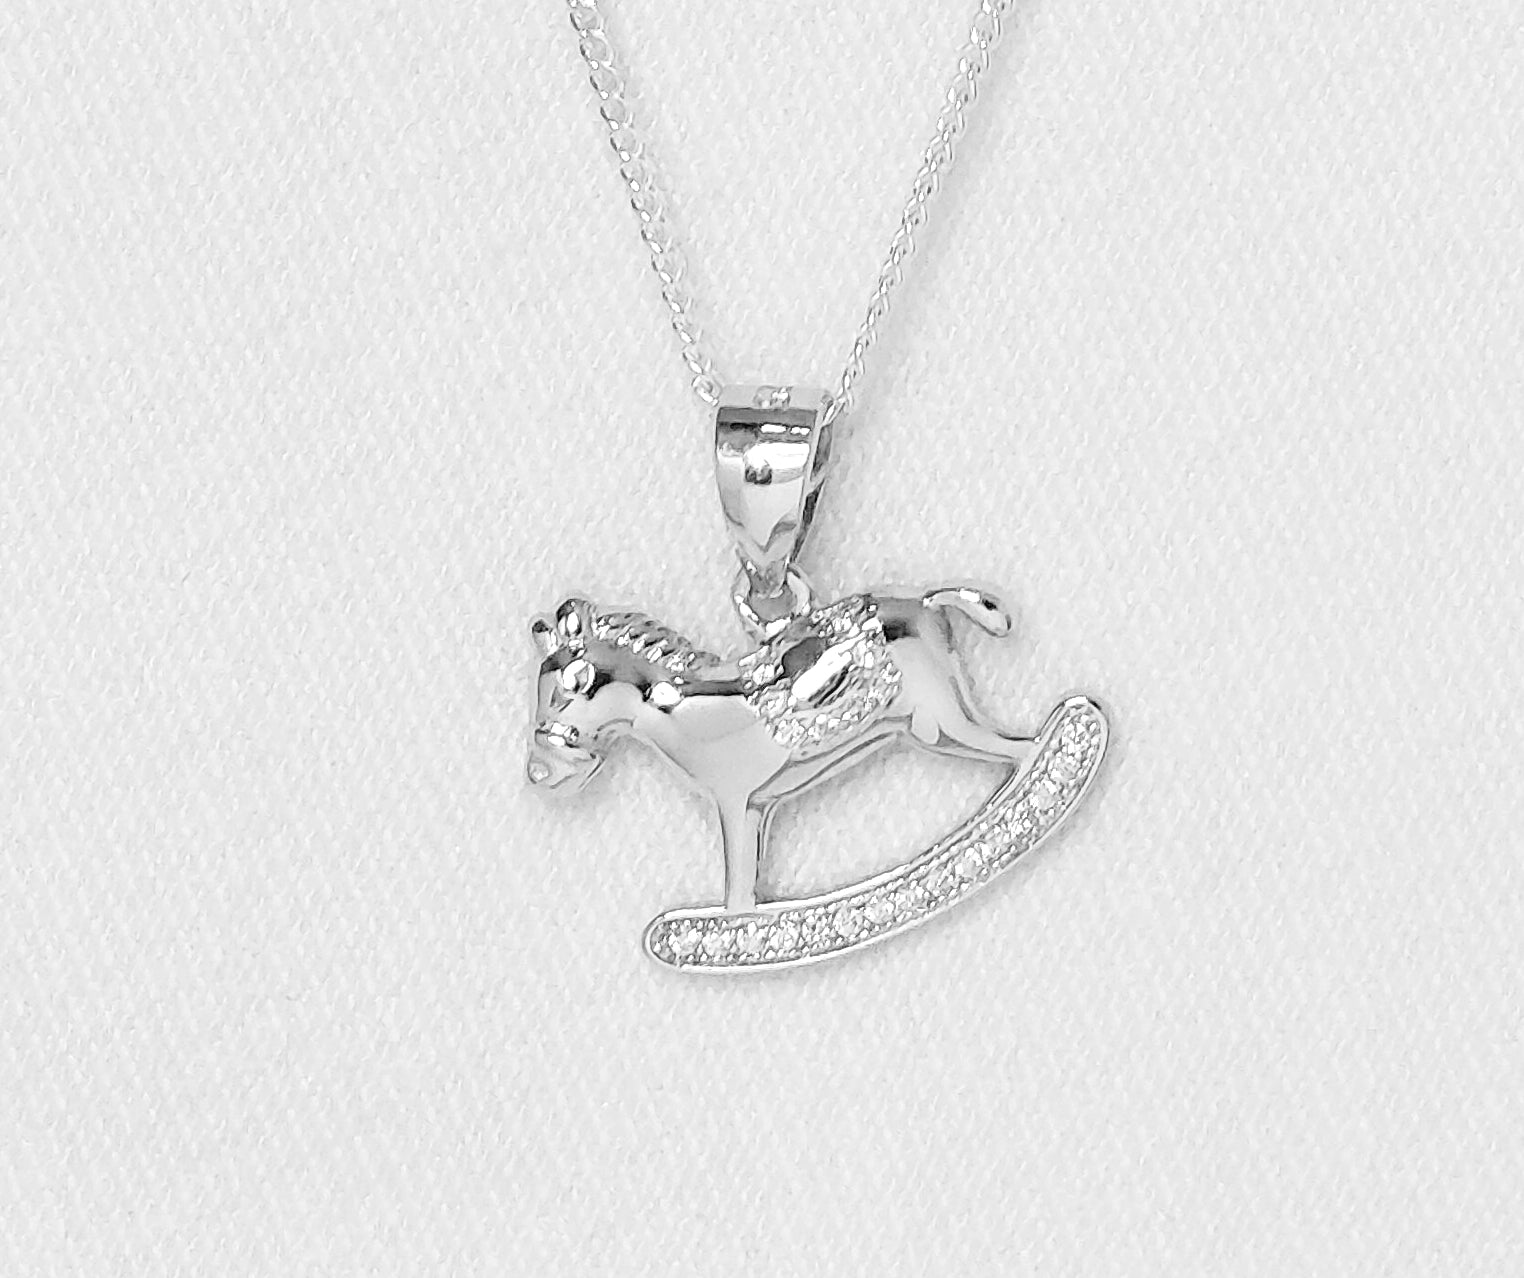 Sterling Silver Rocking Horse Pendant with Cubic Zirconia Stones